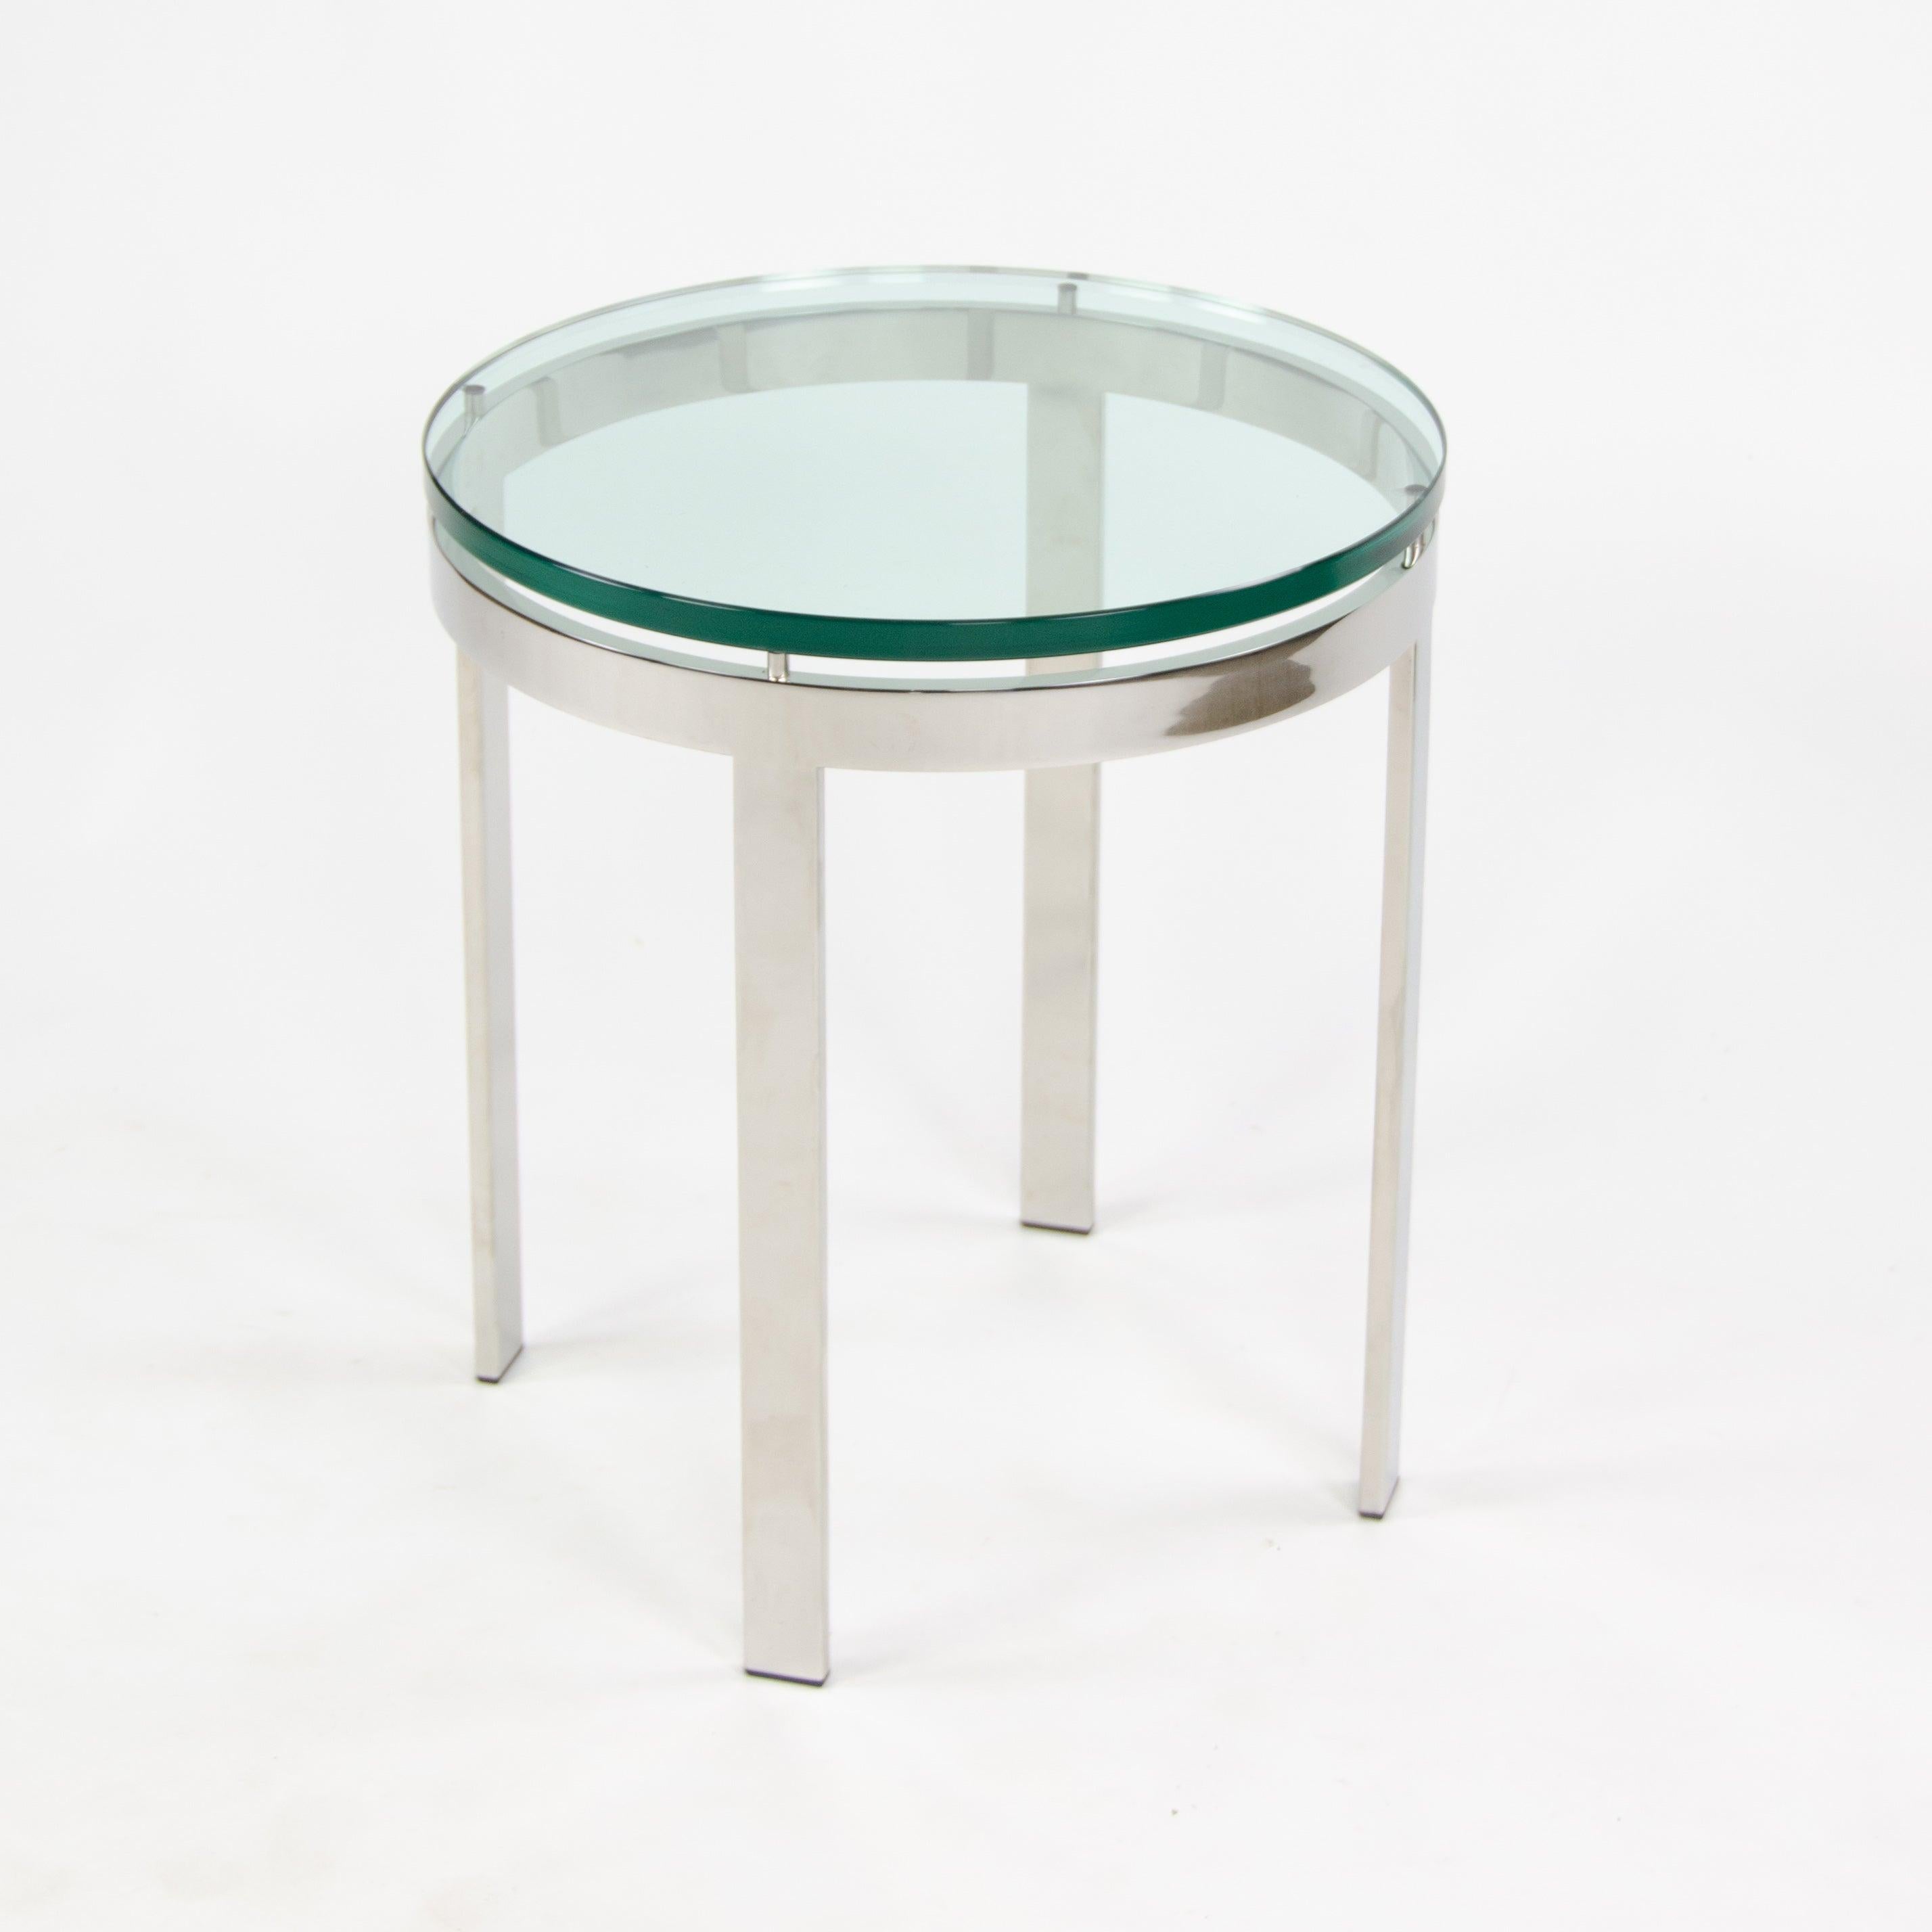 Modern Nicos Zographos Designs Limited Glass Stainless Side Table from SOM Project For Sale